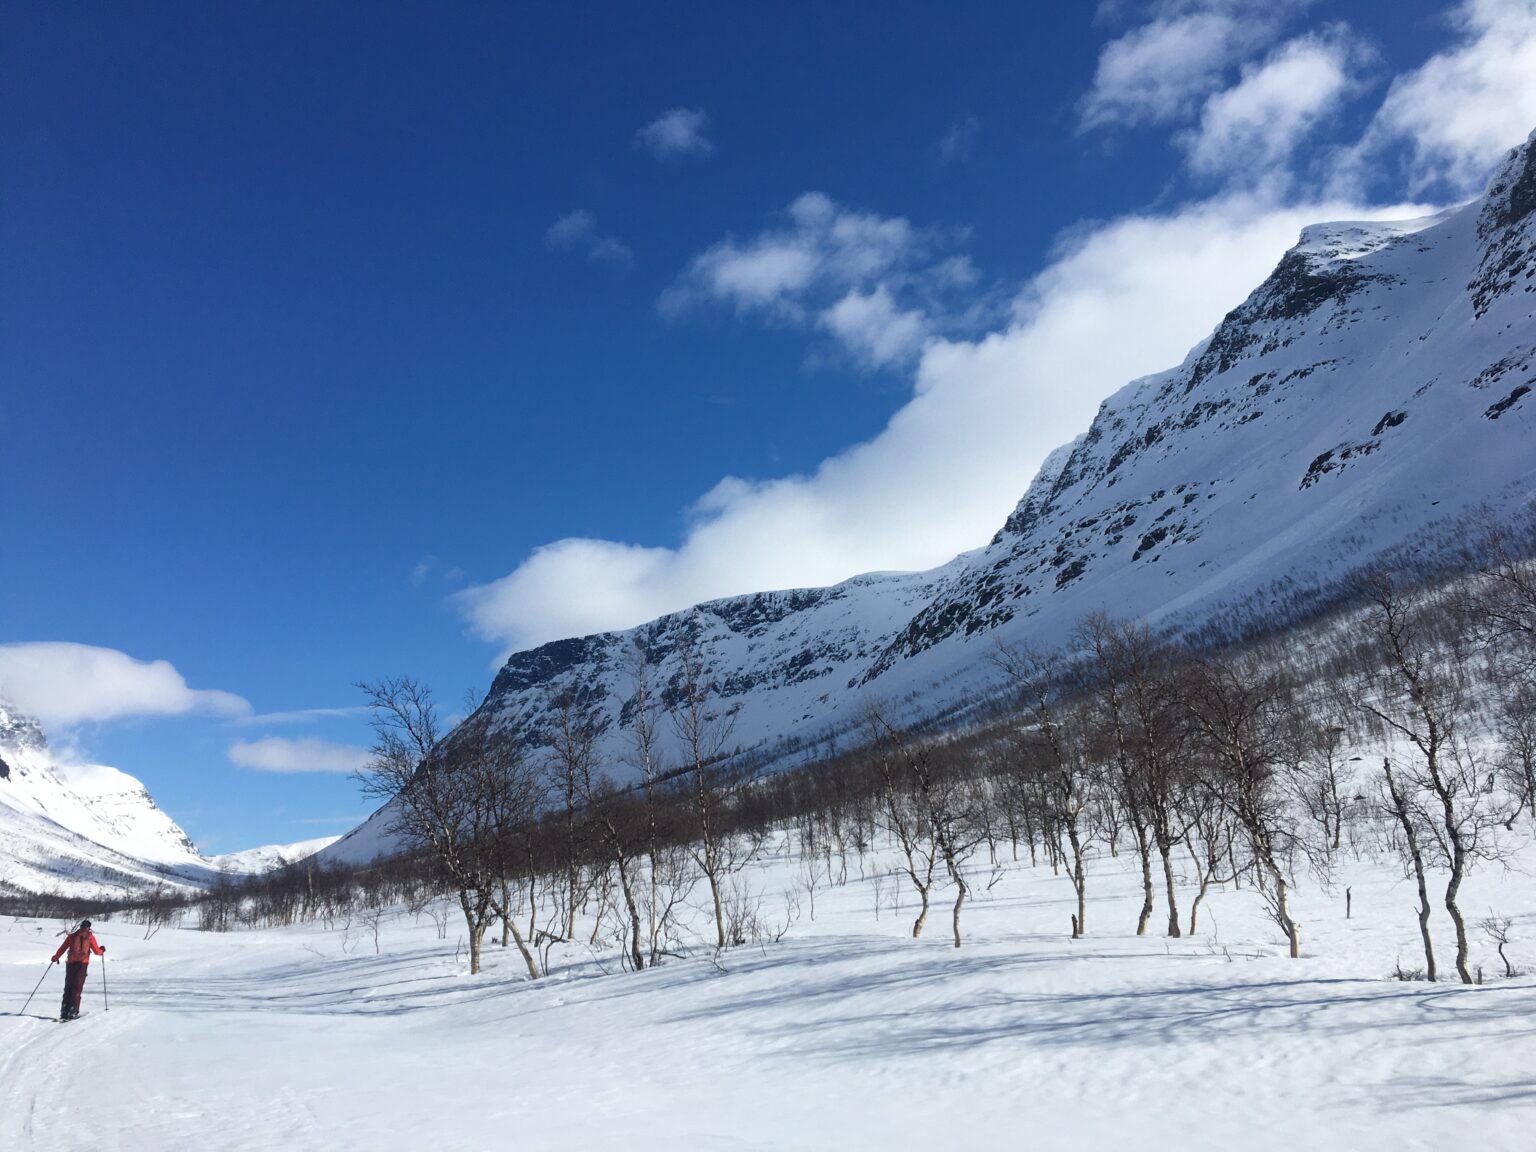 Looking up at Cahcevahnjunni while ski touring through the Vassdalen Valley